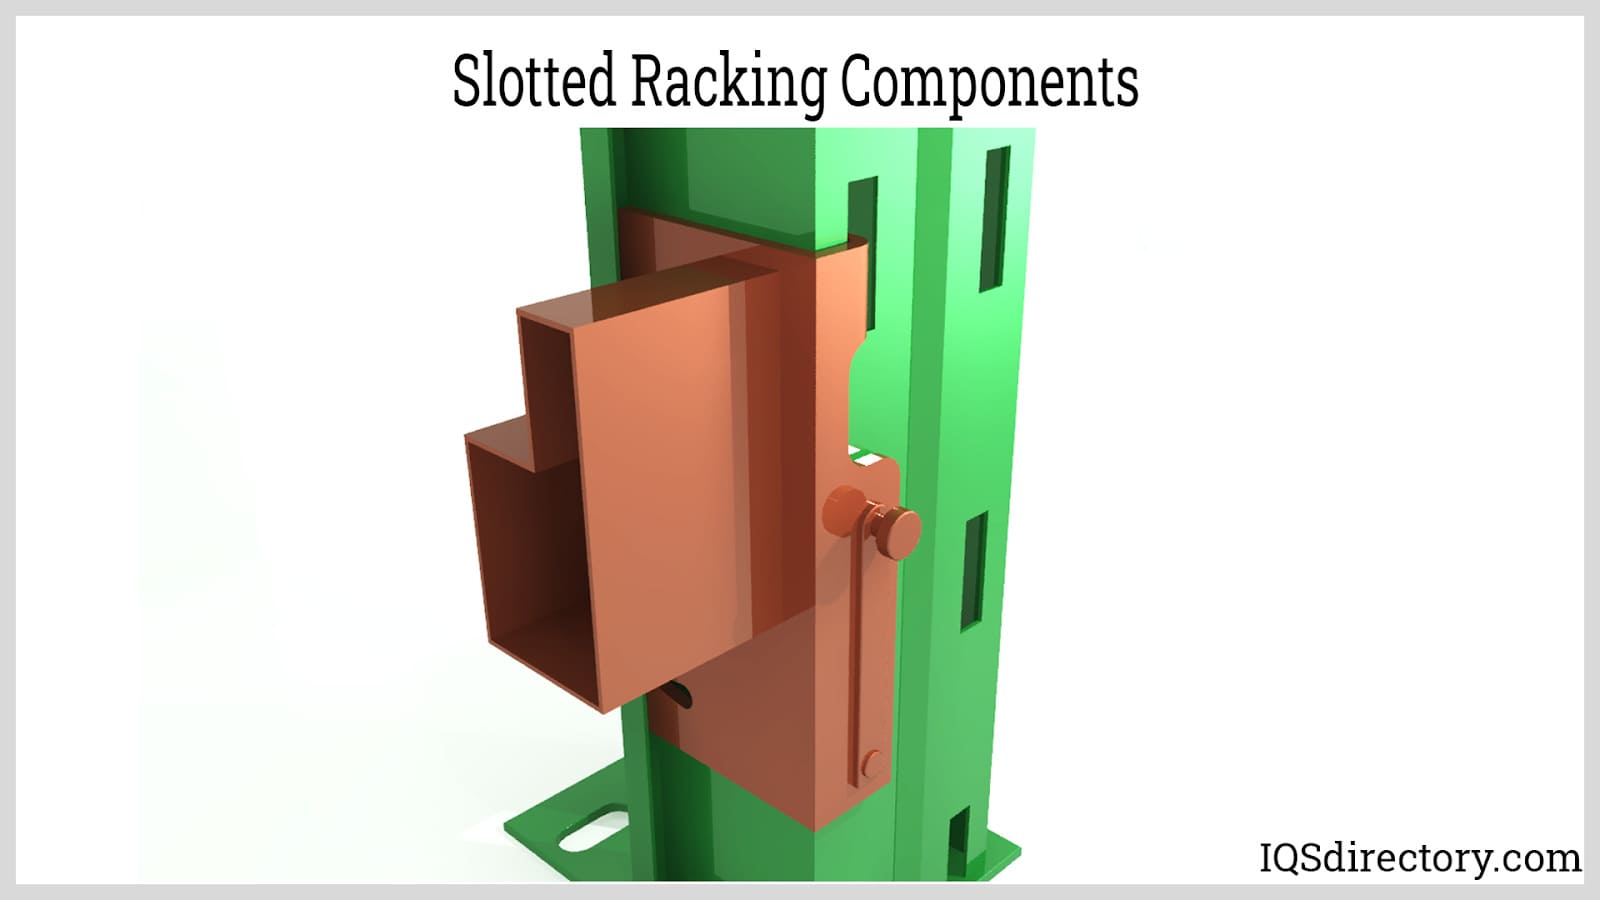 Slotted Racking Components